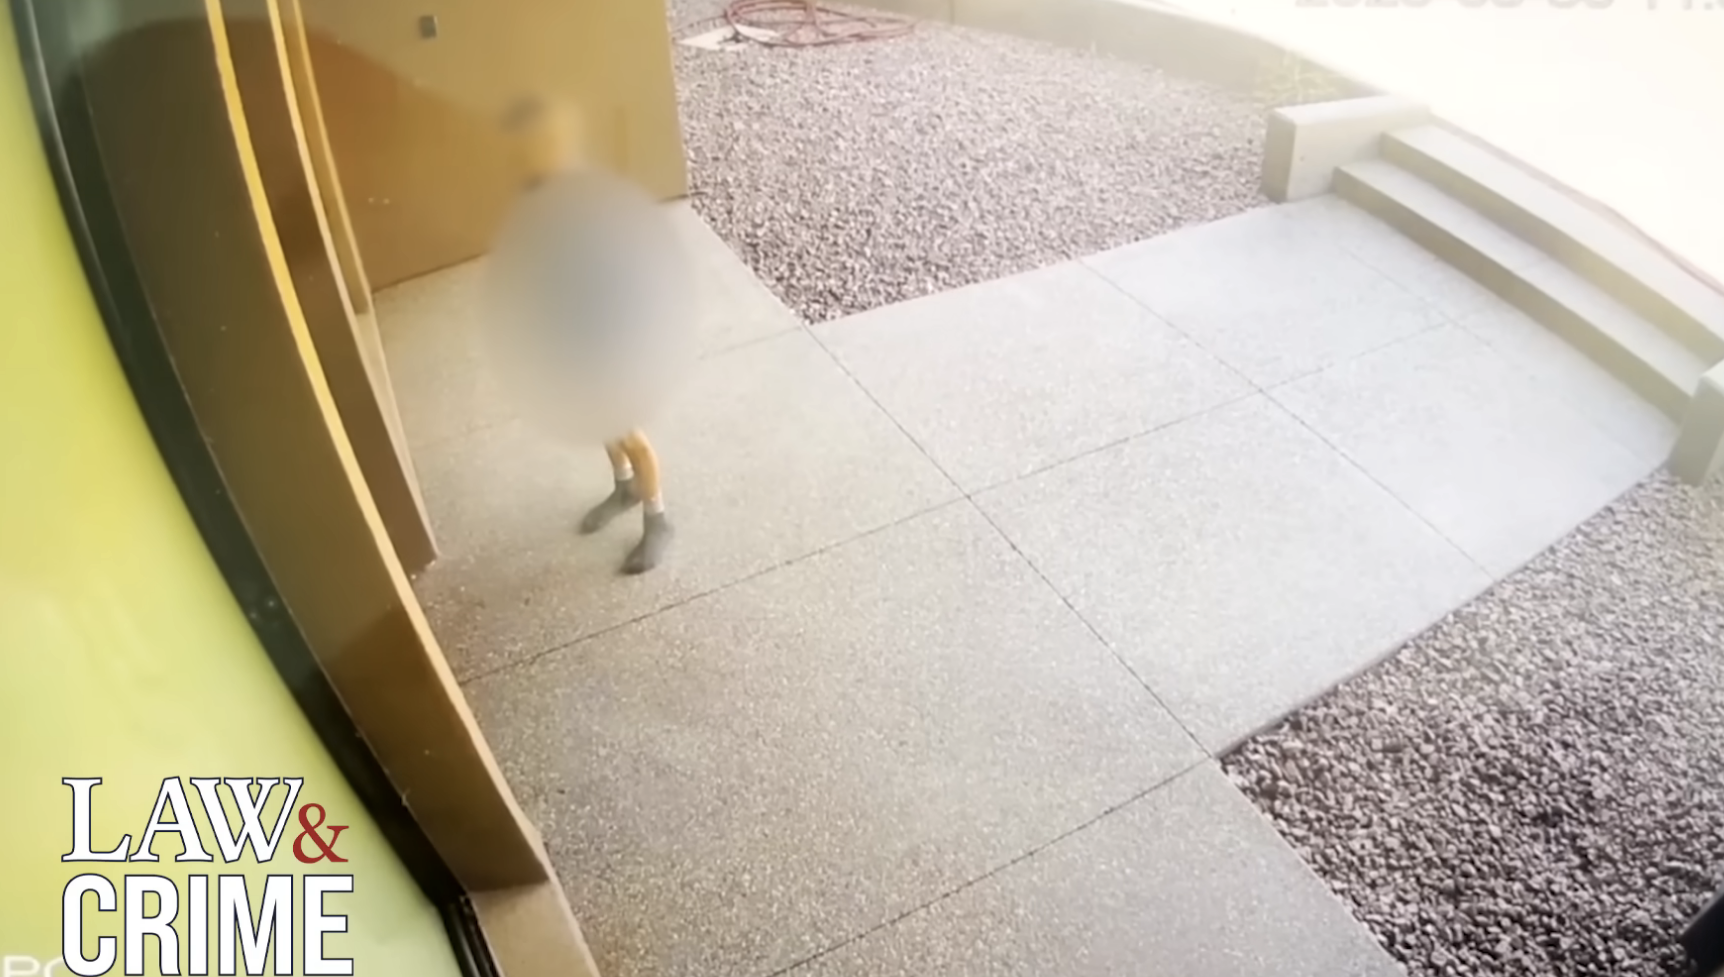 Surveillance footage showing a blurred child outside a building